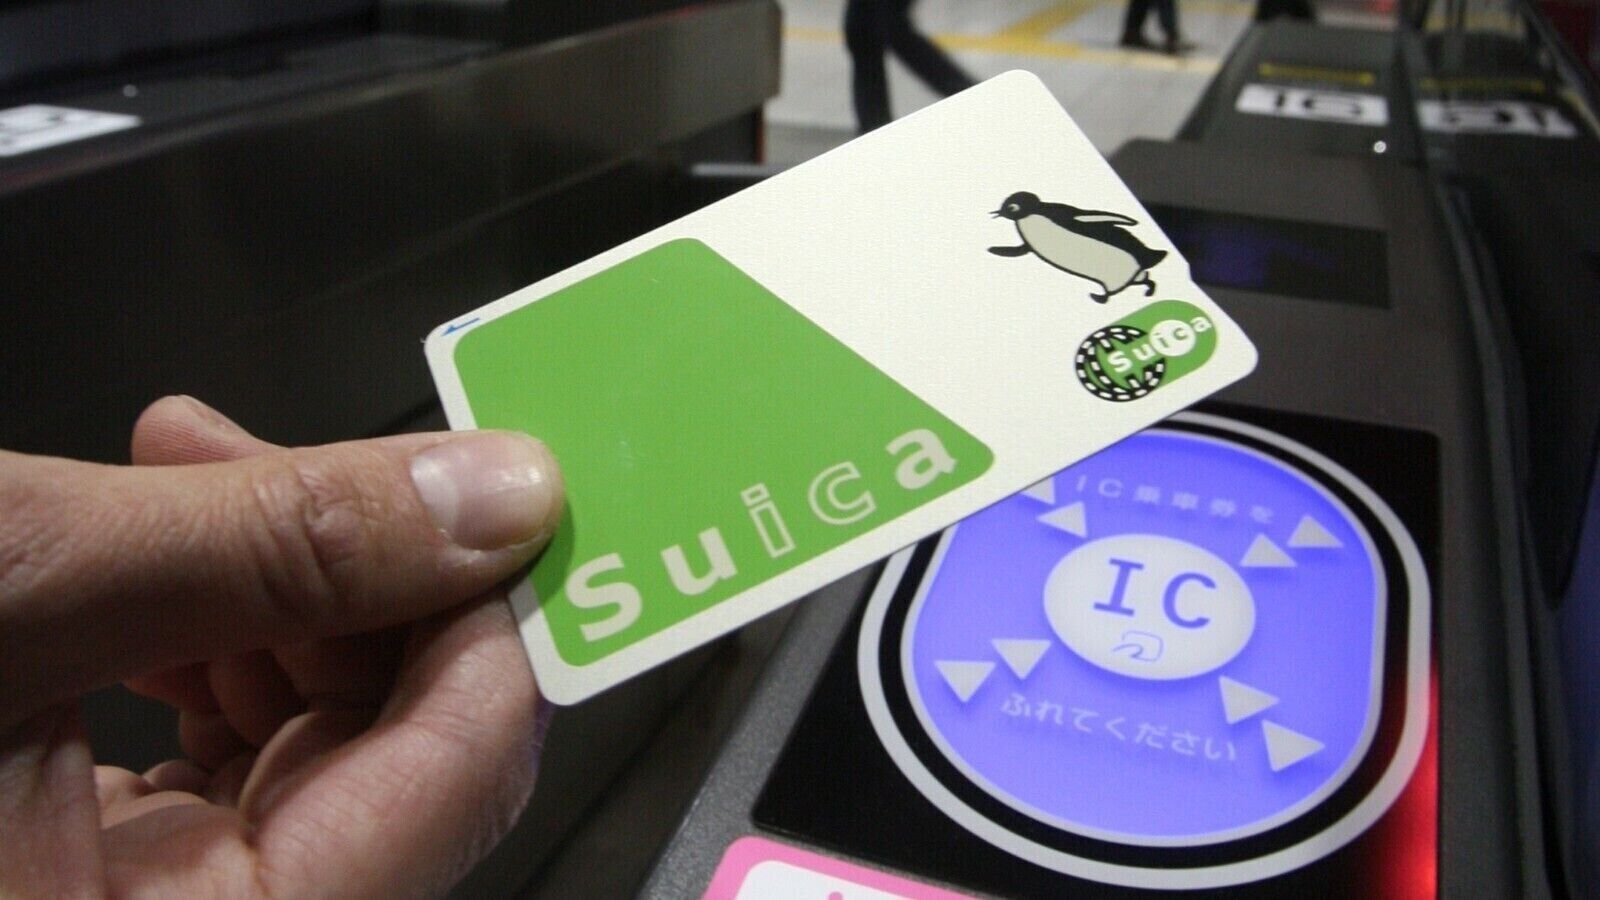 Hotel delivery available in Japan Penguin Normal Suica Prepaid IC card JR East